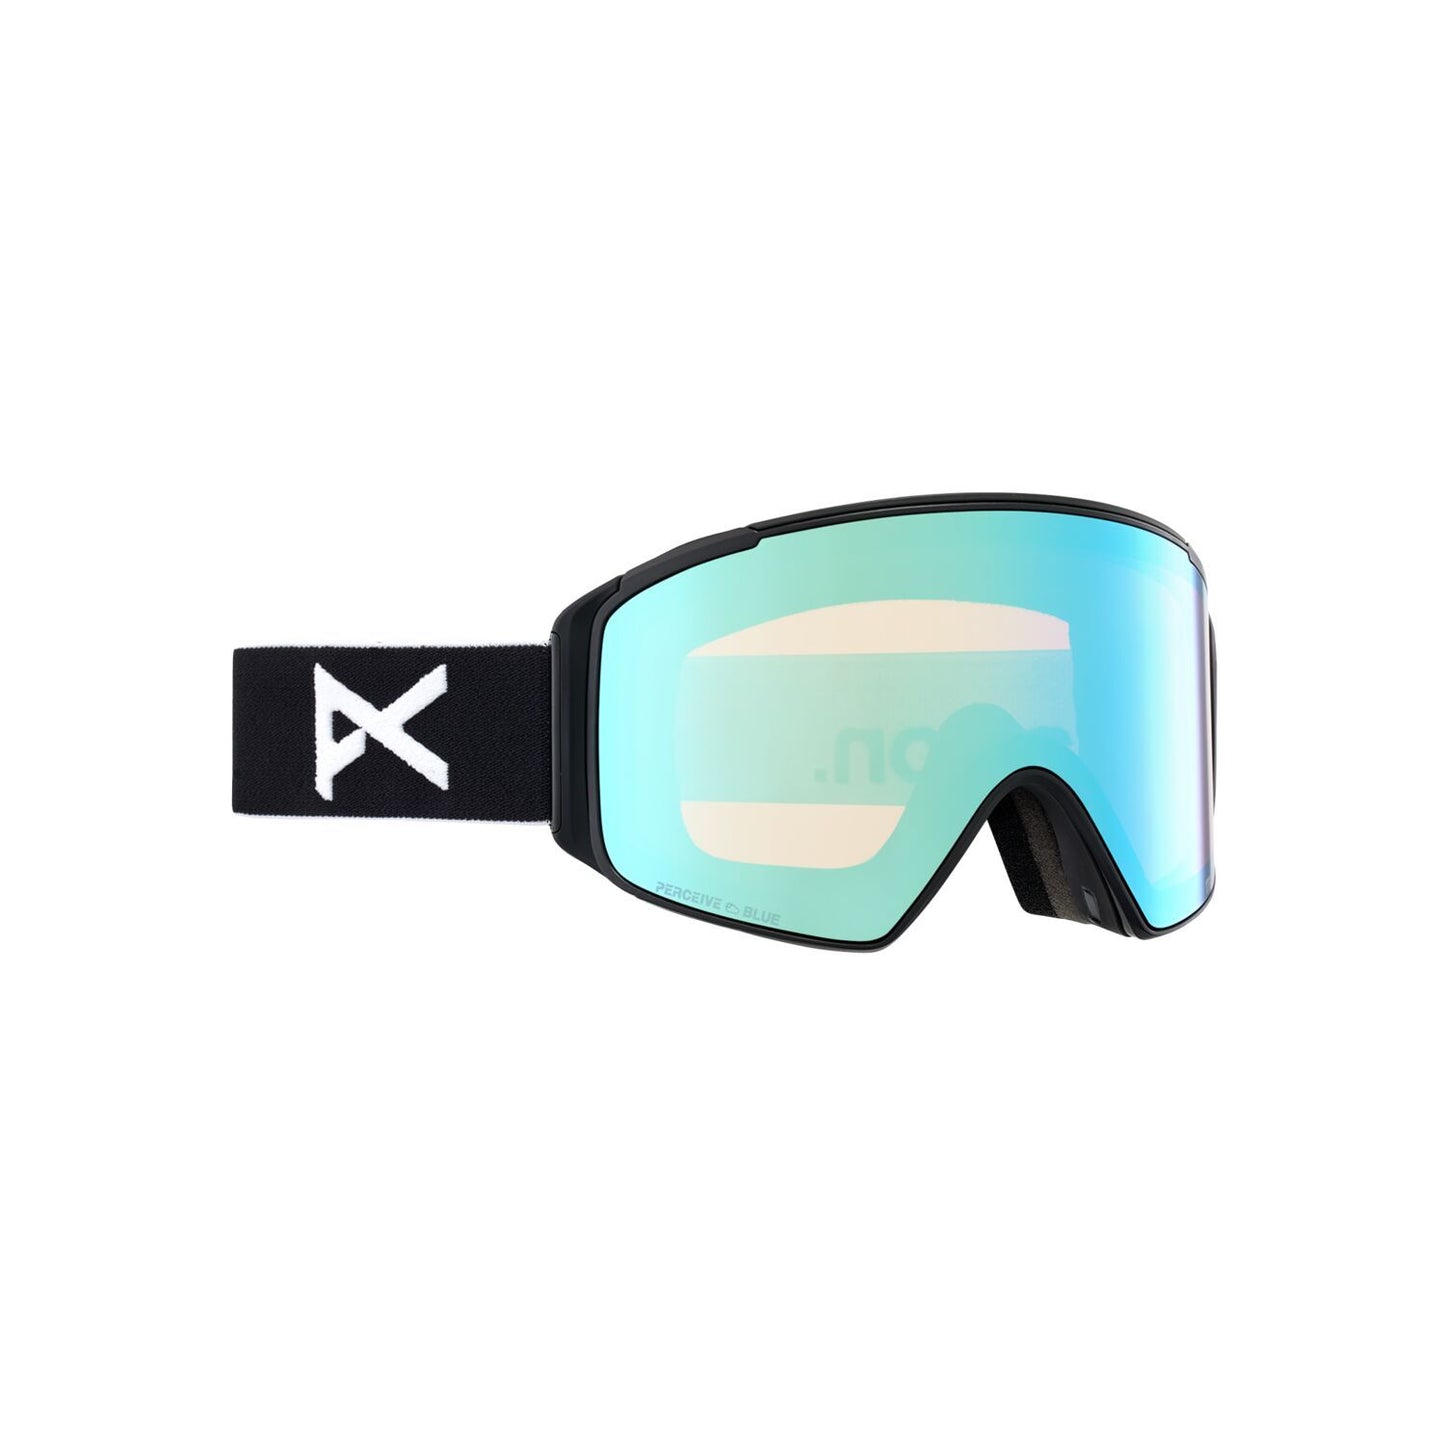 Anon M4S Cylindrical Goggles + Bonus Lens + MFI Face Mask Black Perceive Variable Blue Snow Goggles